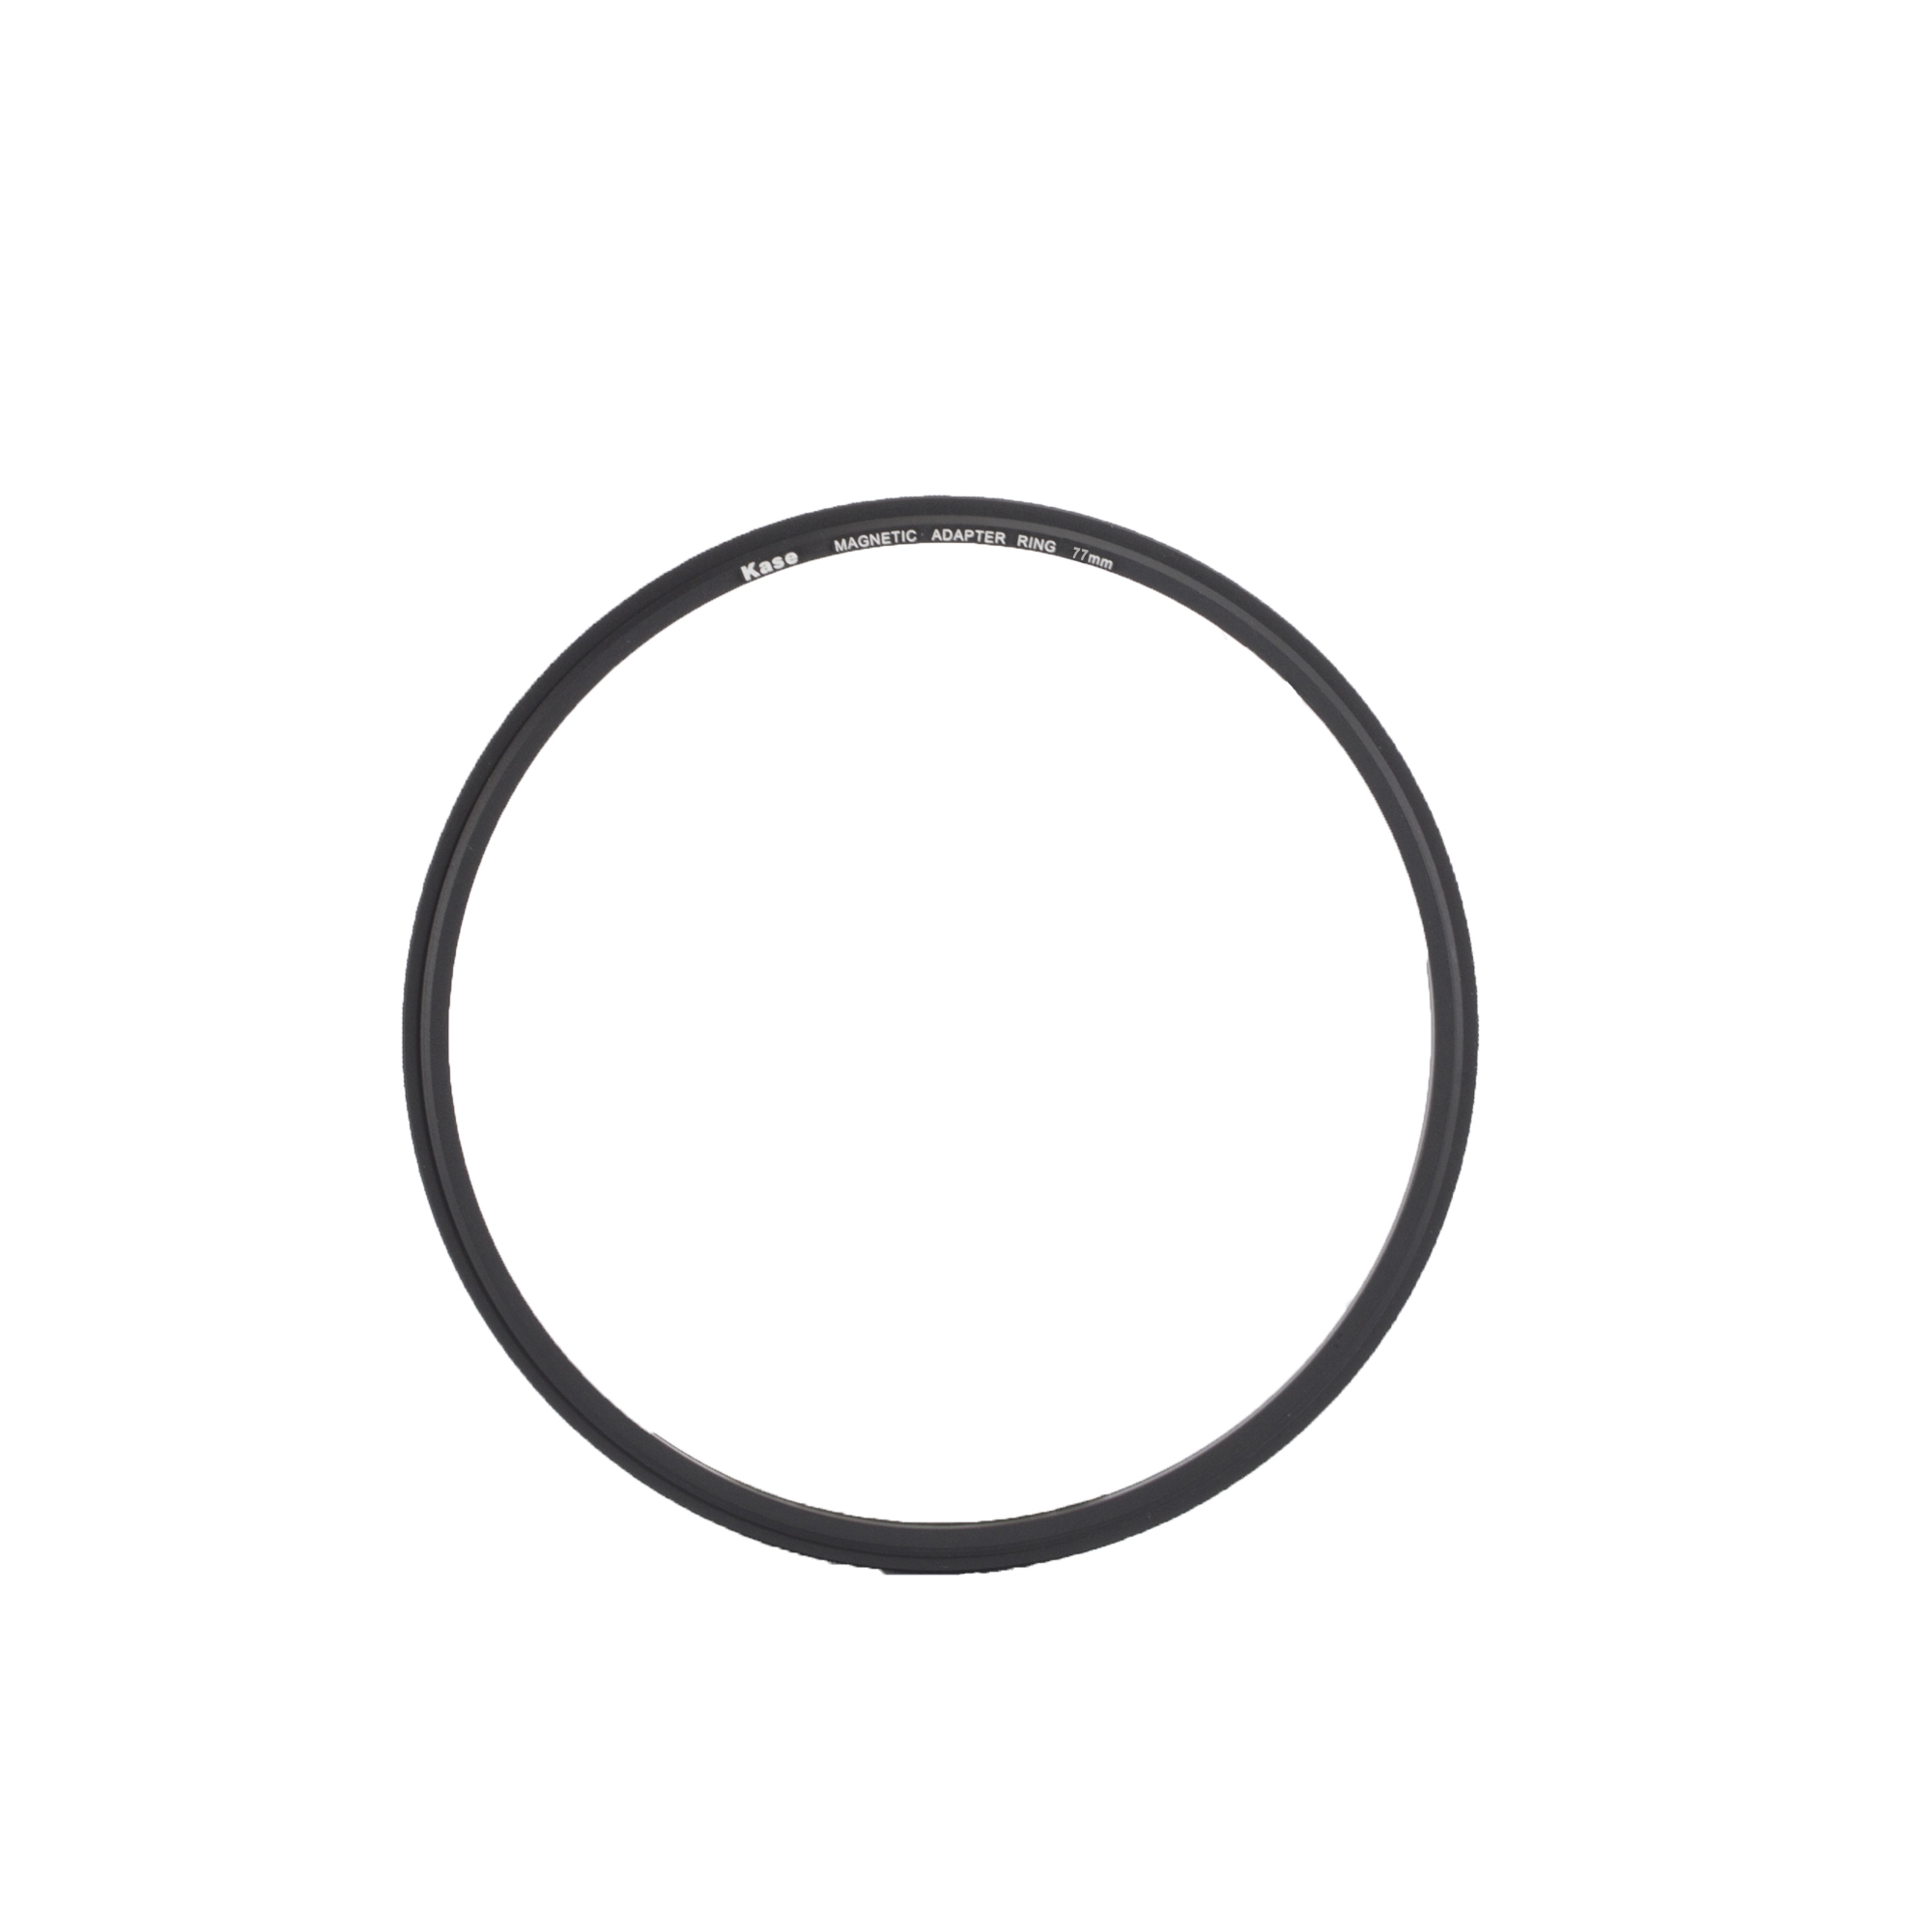 KaseFilters 77-86mm magnetic adapter ring (for use with magnetic 86mm Polarizer)